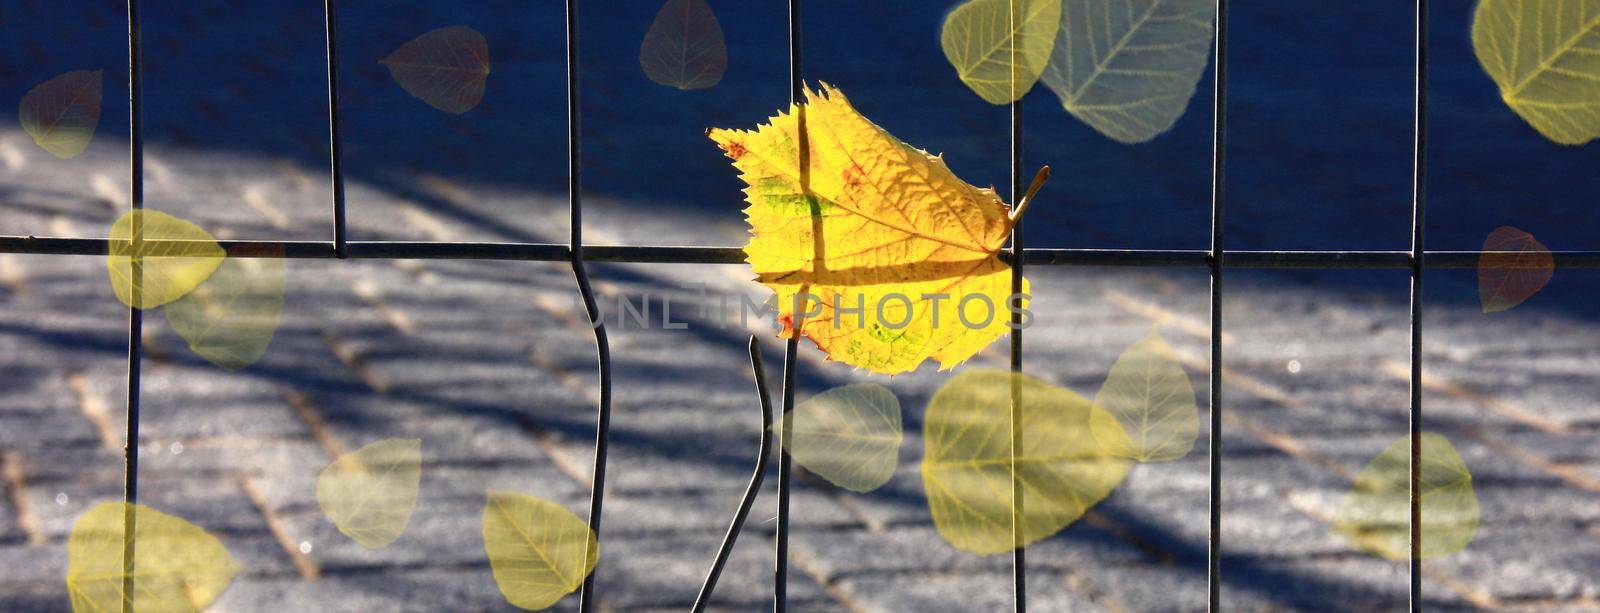 Autumn yellow leaves over metal fence during sunny day